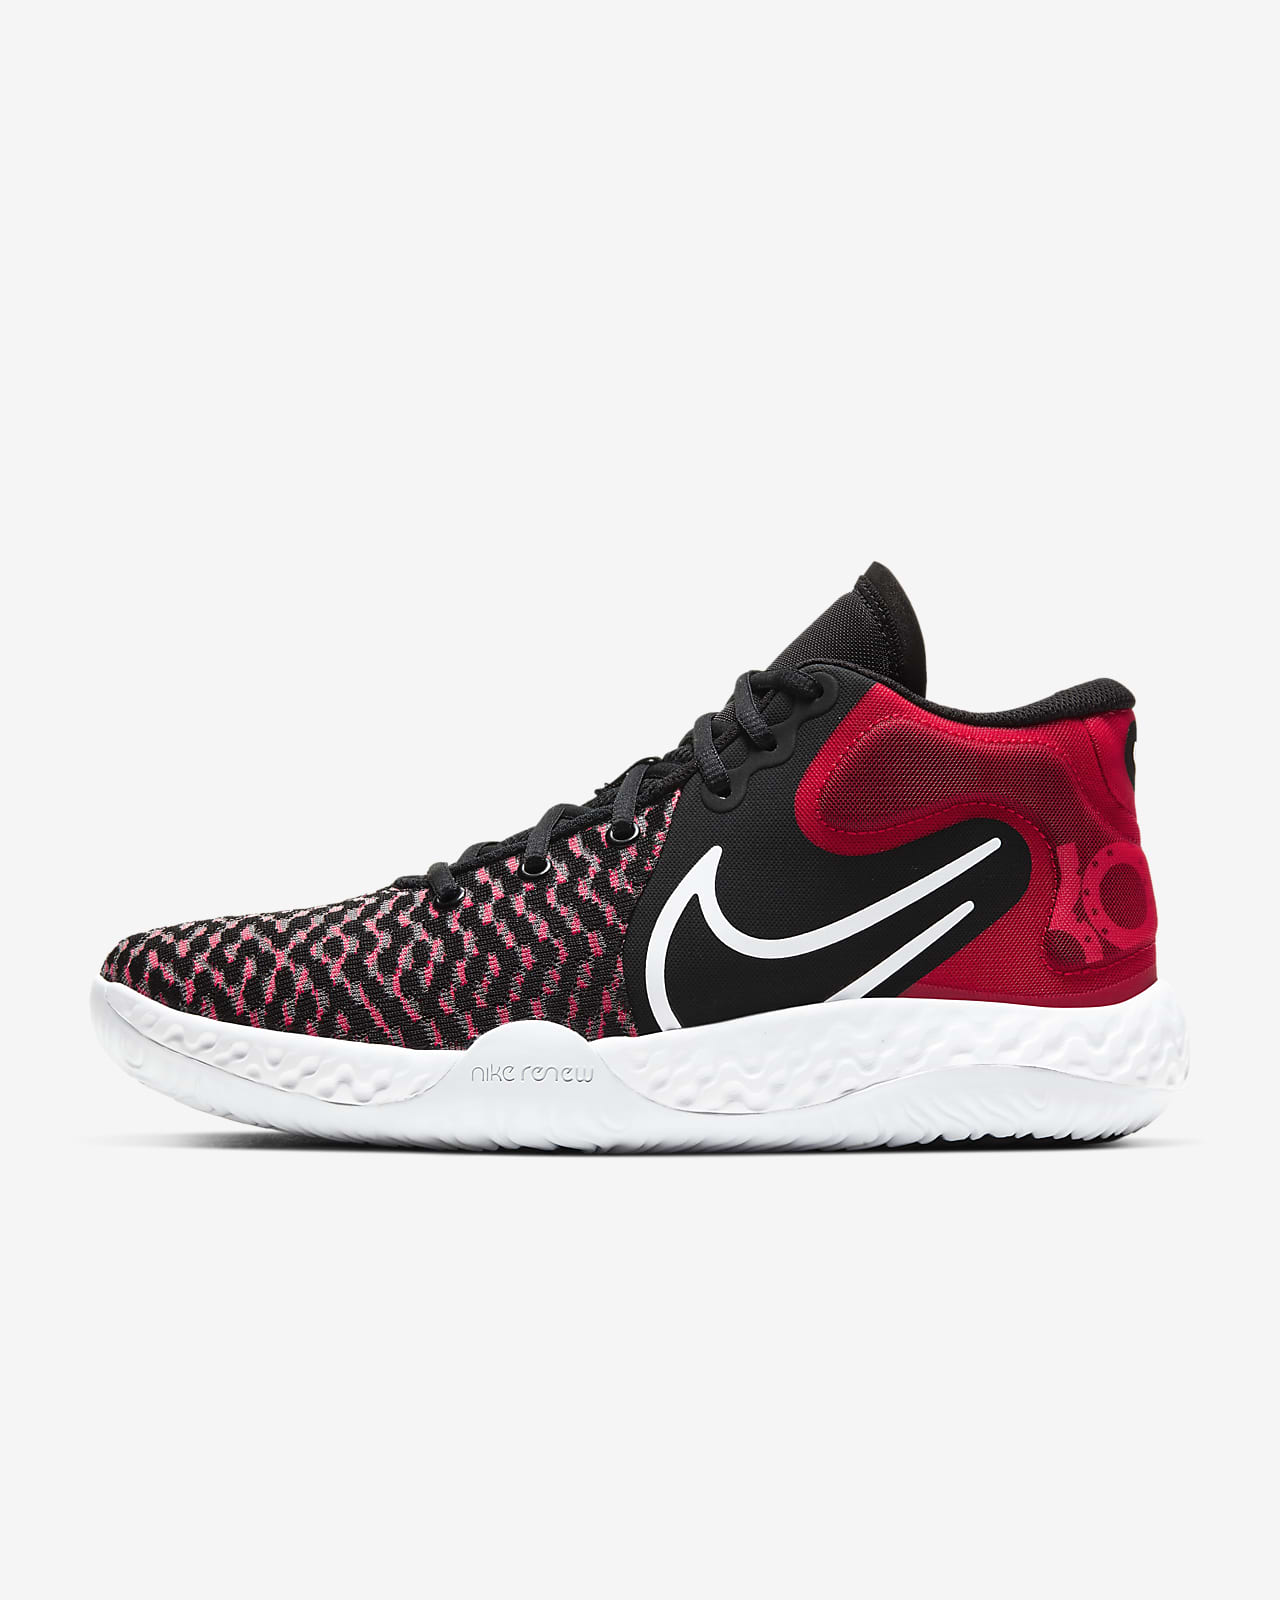 nike red black basketball shoes